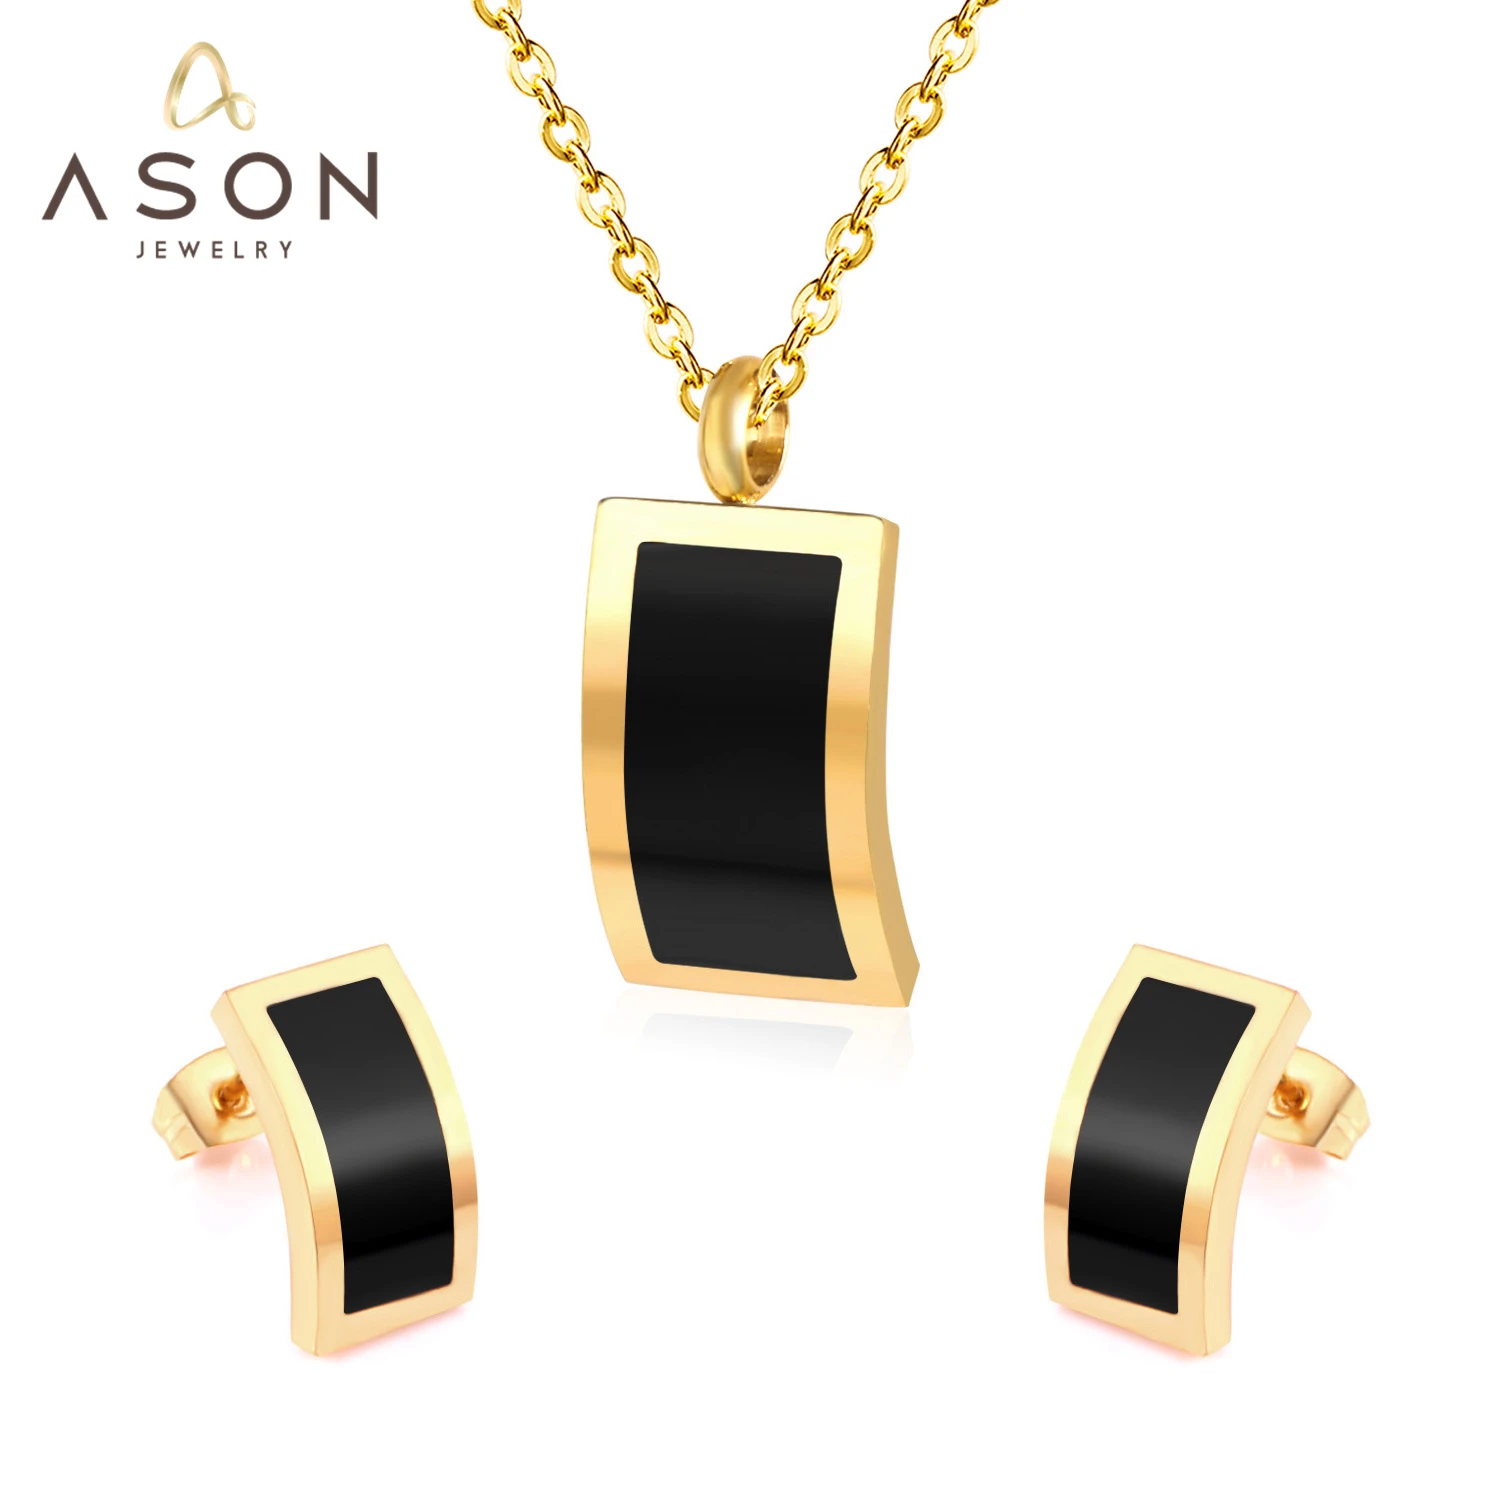 

ASONSTEEL Stainless Steel White Black Shell Pendant Necklace Piercing Stud Earrings Jewelry Sets Gold Color For Women Trending